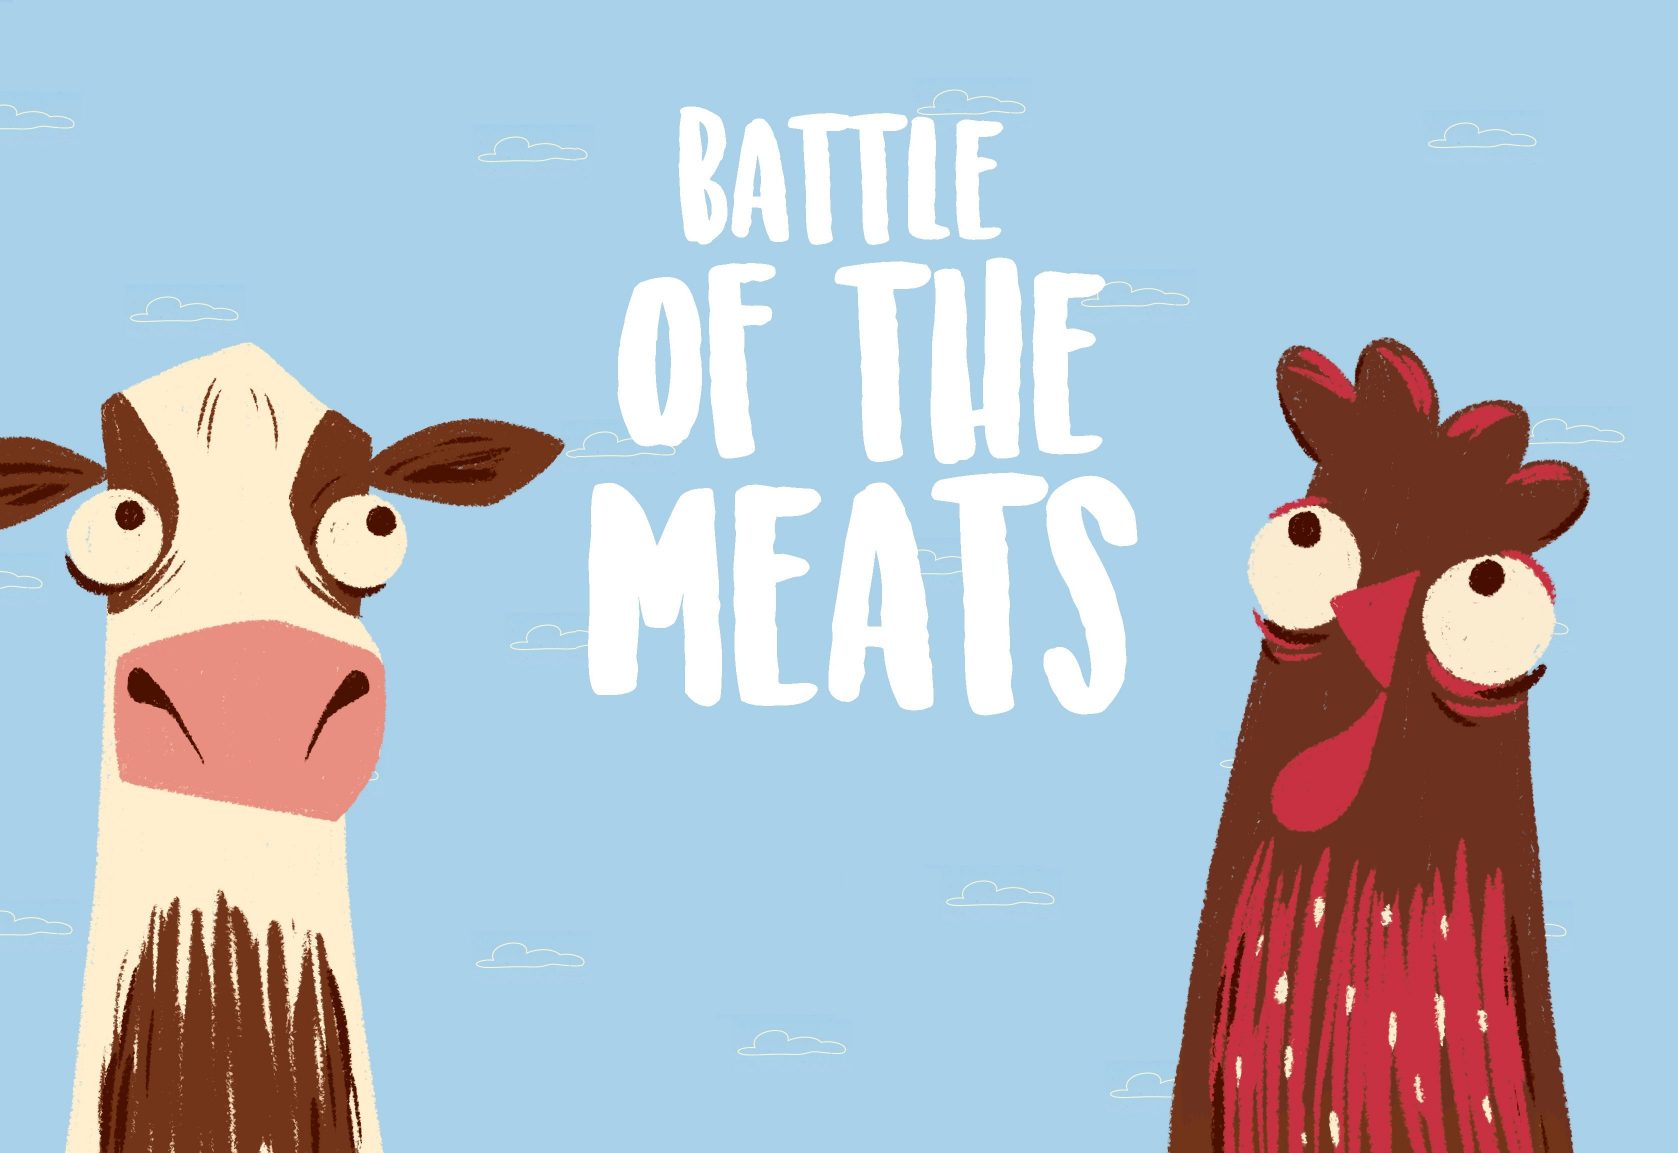 battle of the meats chicken beef